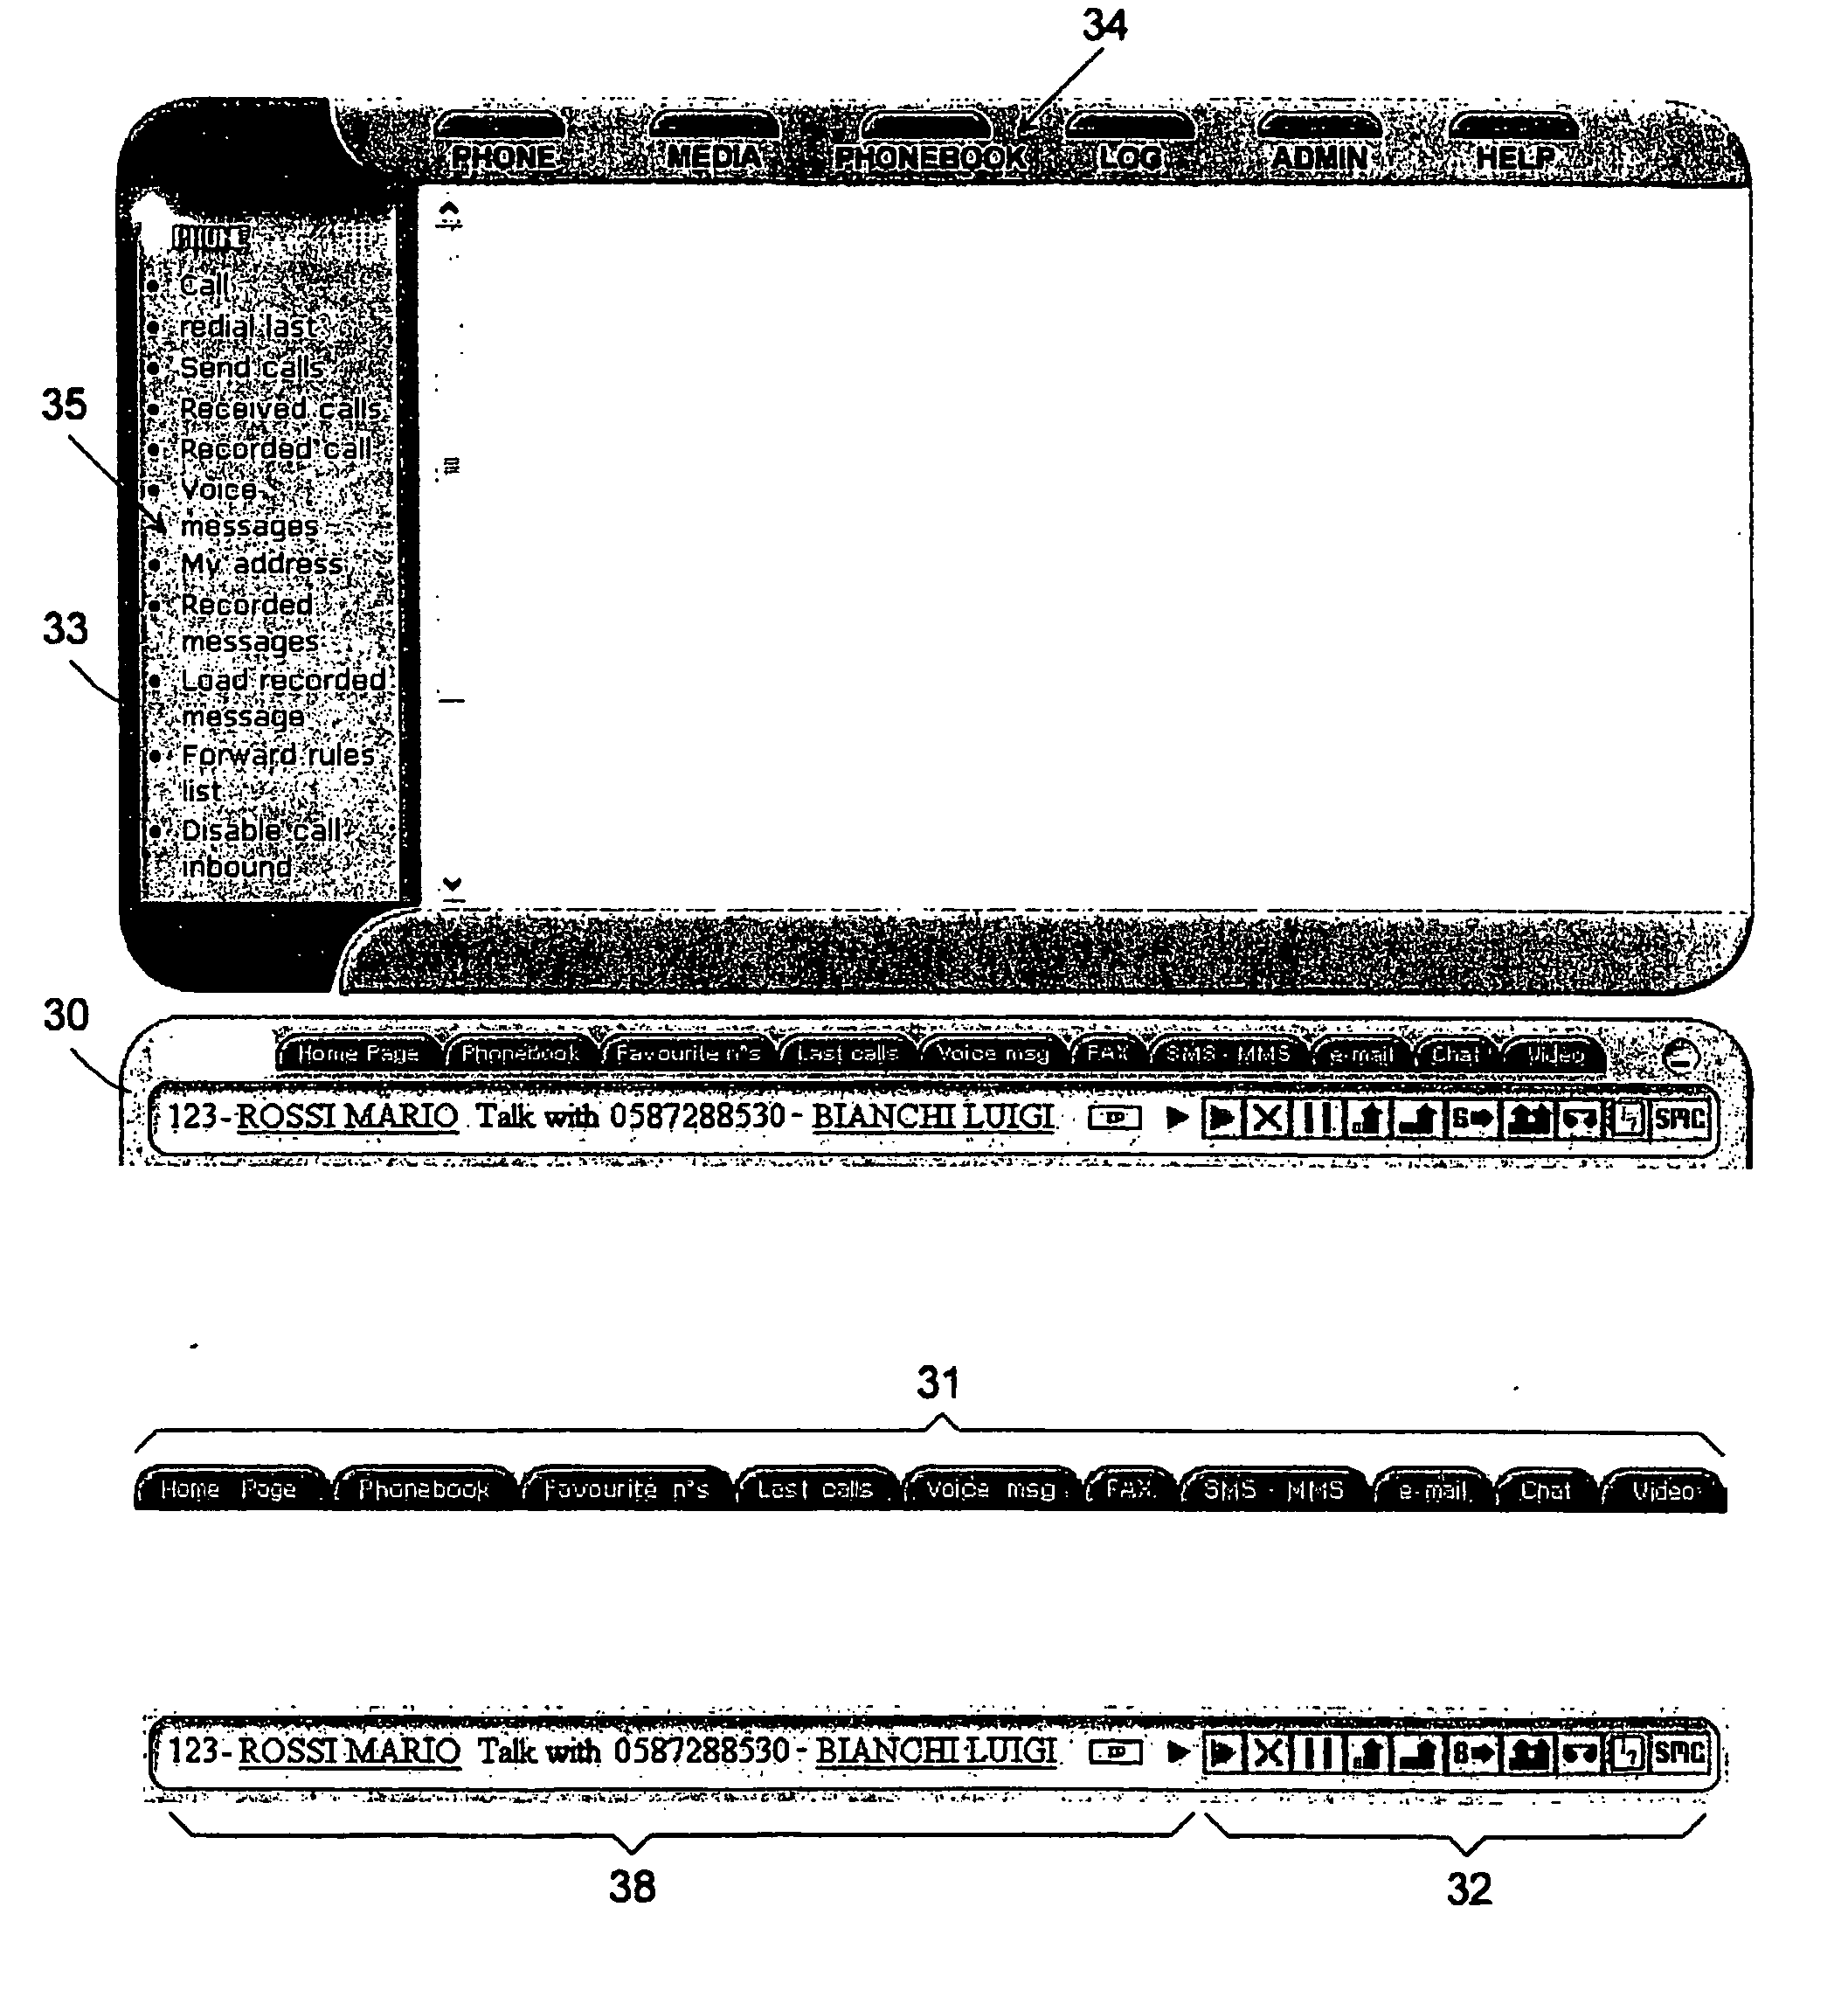 Method and Apparatus for Unified Management of Different Type of Communications Over Lan, Wan and Internet Networks, Using A Web Browser